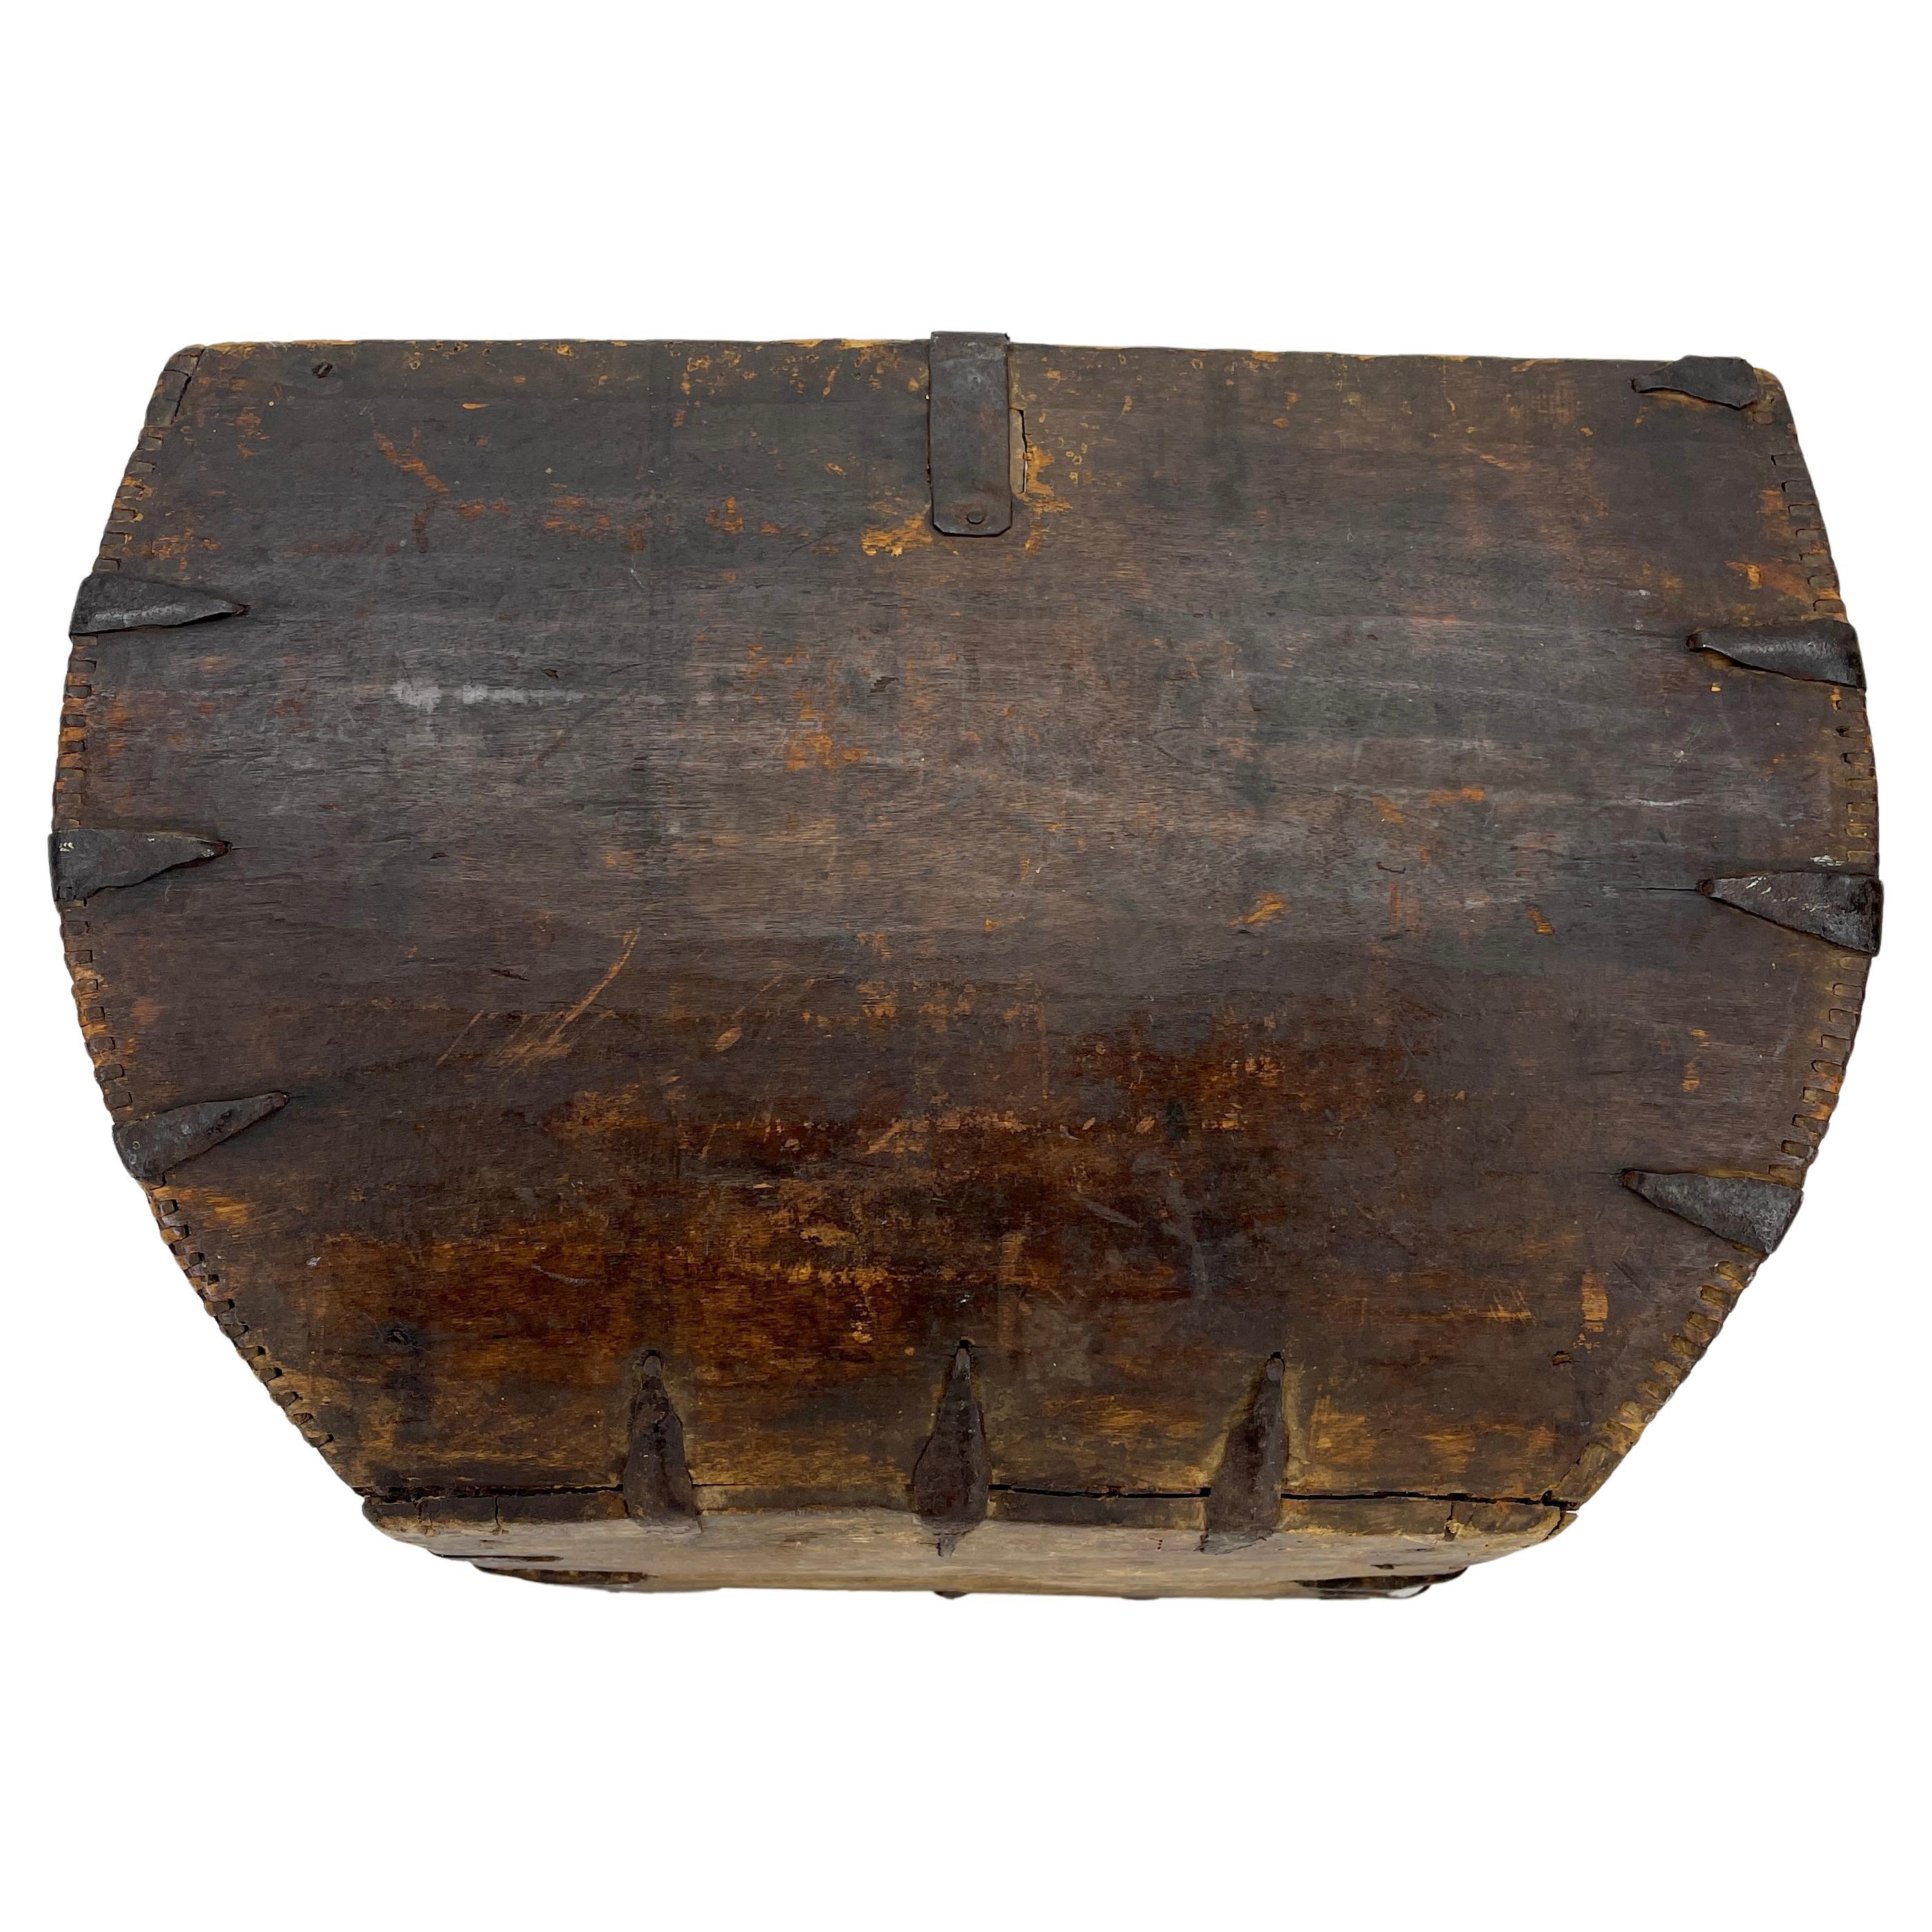 Antique wooden box with center handle. This vintage box is sturdy, full of character and bears a fantastic patina from age. With the center handle it can easily be used for carrying wood or just as an interesting decor object in the home.